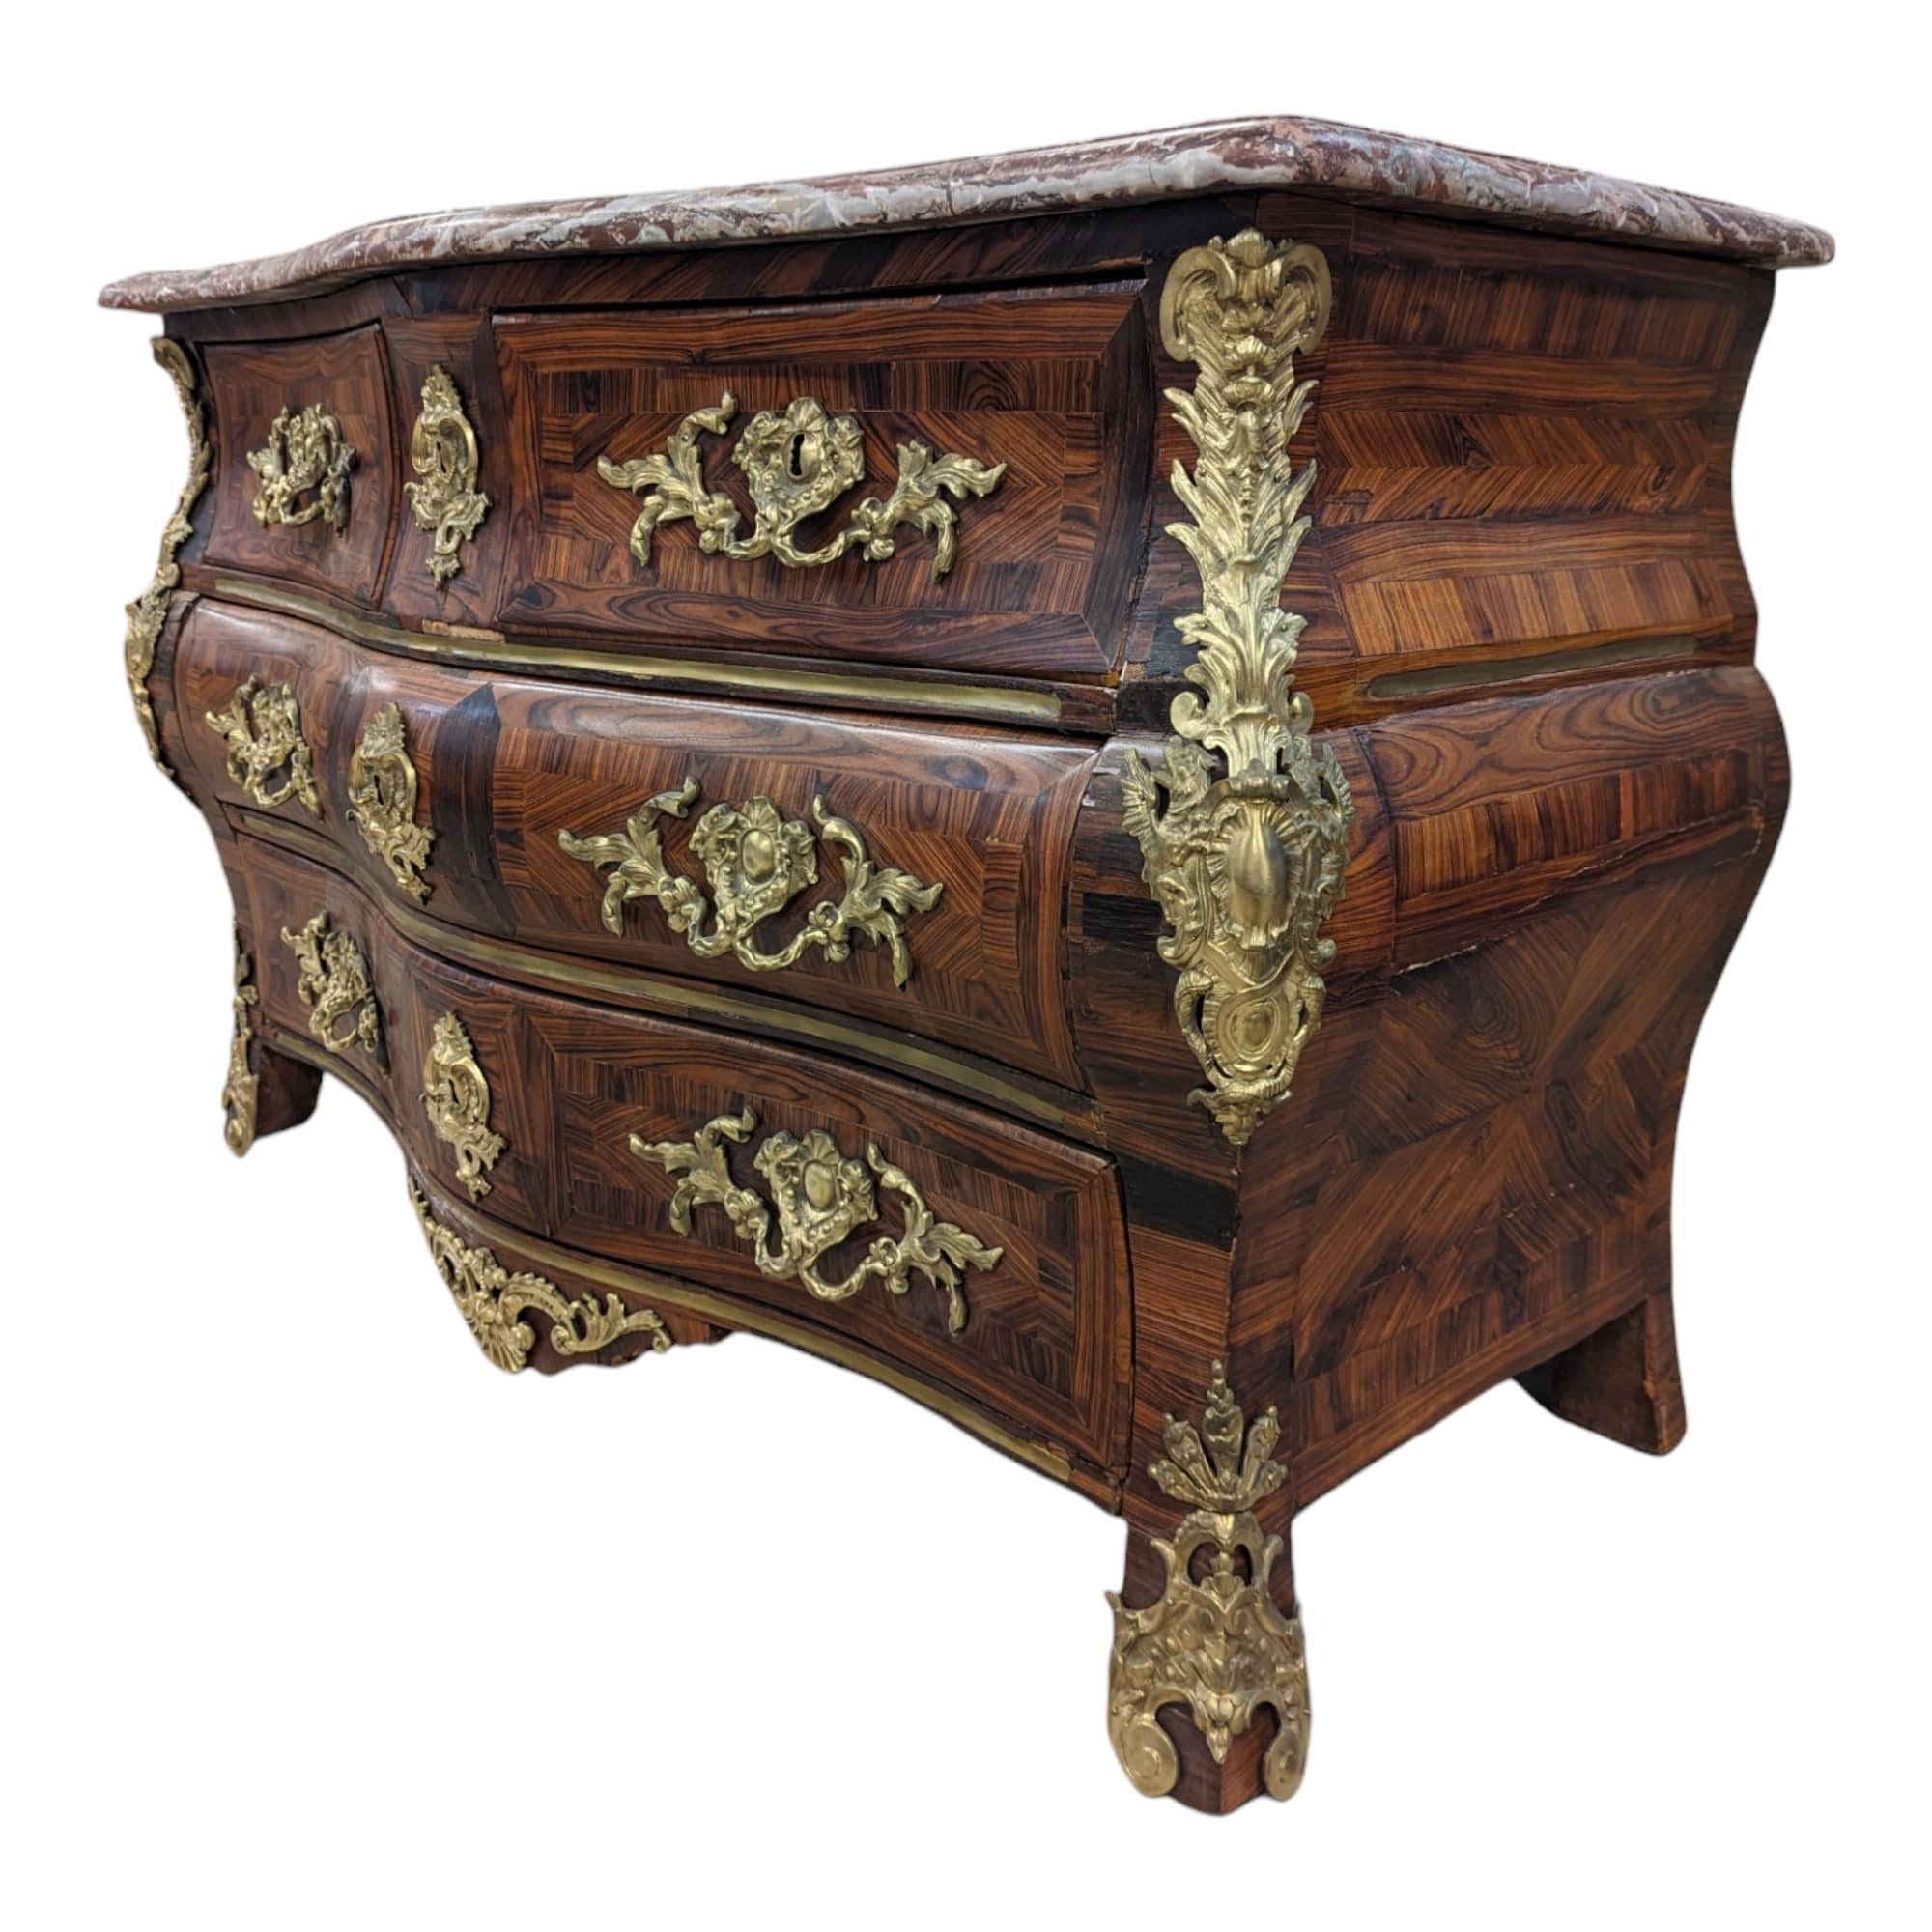 Coming from France. Discover this remarkable chest of drawers, also known as a tomb chest of drawers or Regency chest of drawers, a true gem of the French era of the 18th century. Opening with four drawers in three rows, this piece is a masterpiece